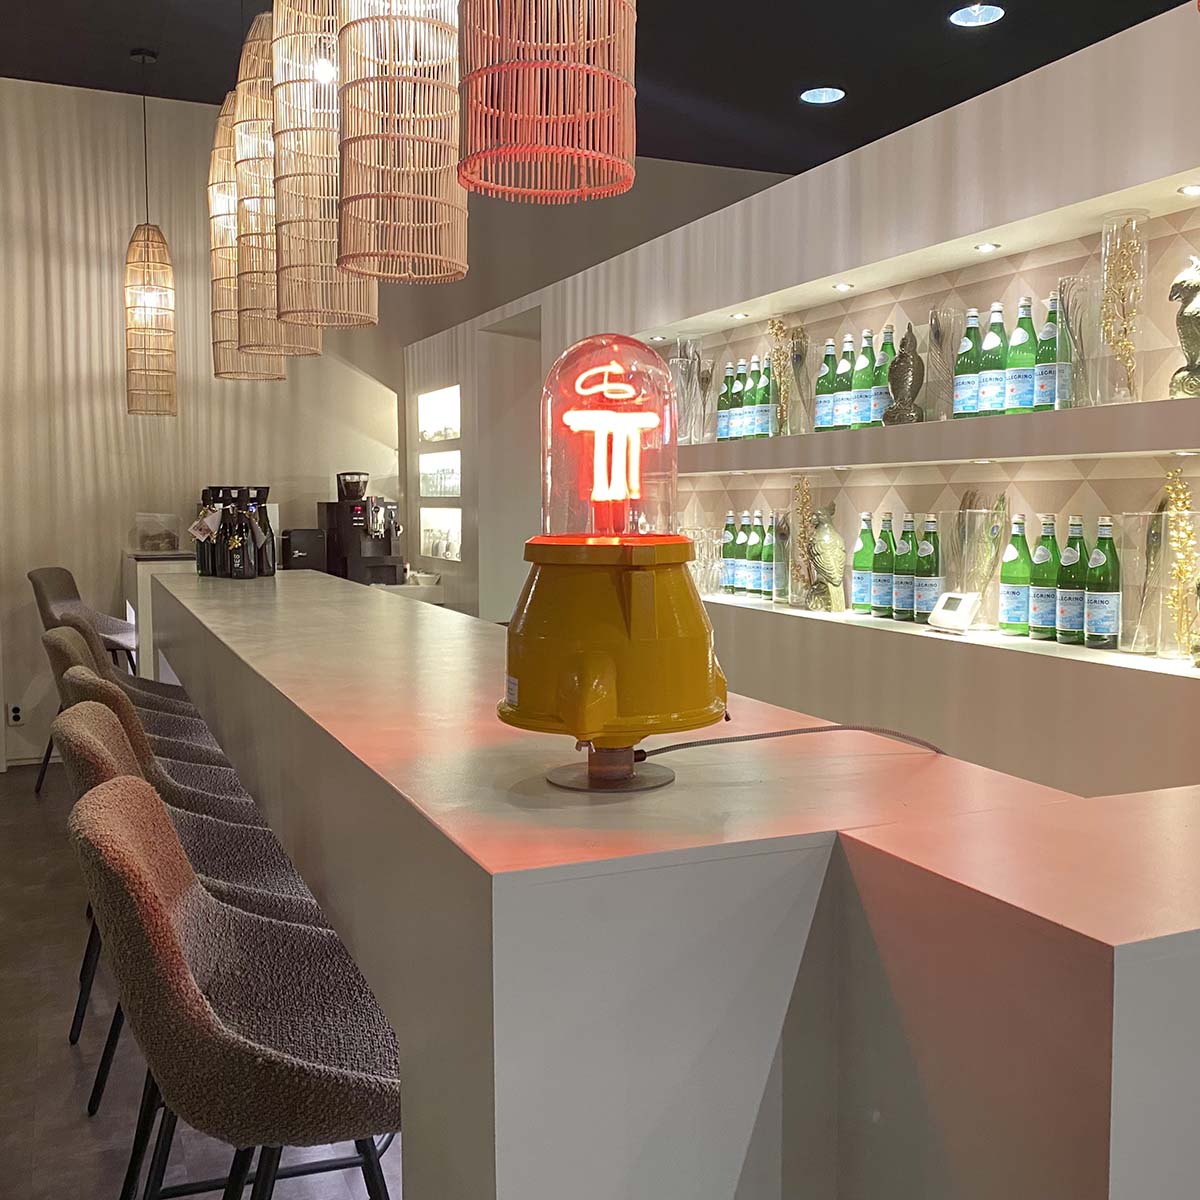 Refurbished AEG Berlin airport obstruction light in use as a light in a light and modern bar.